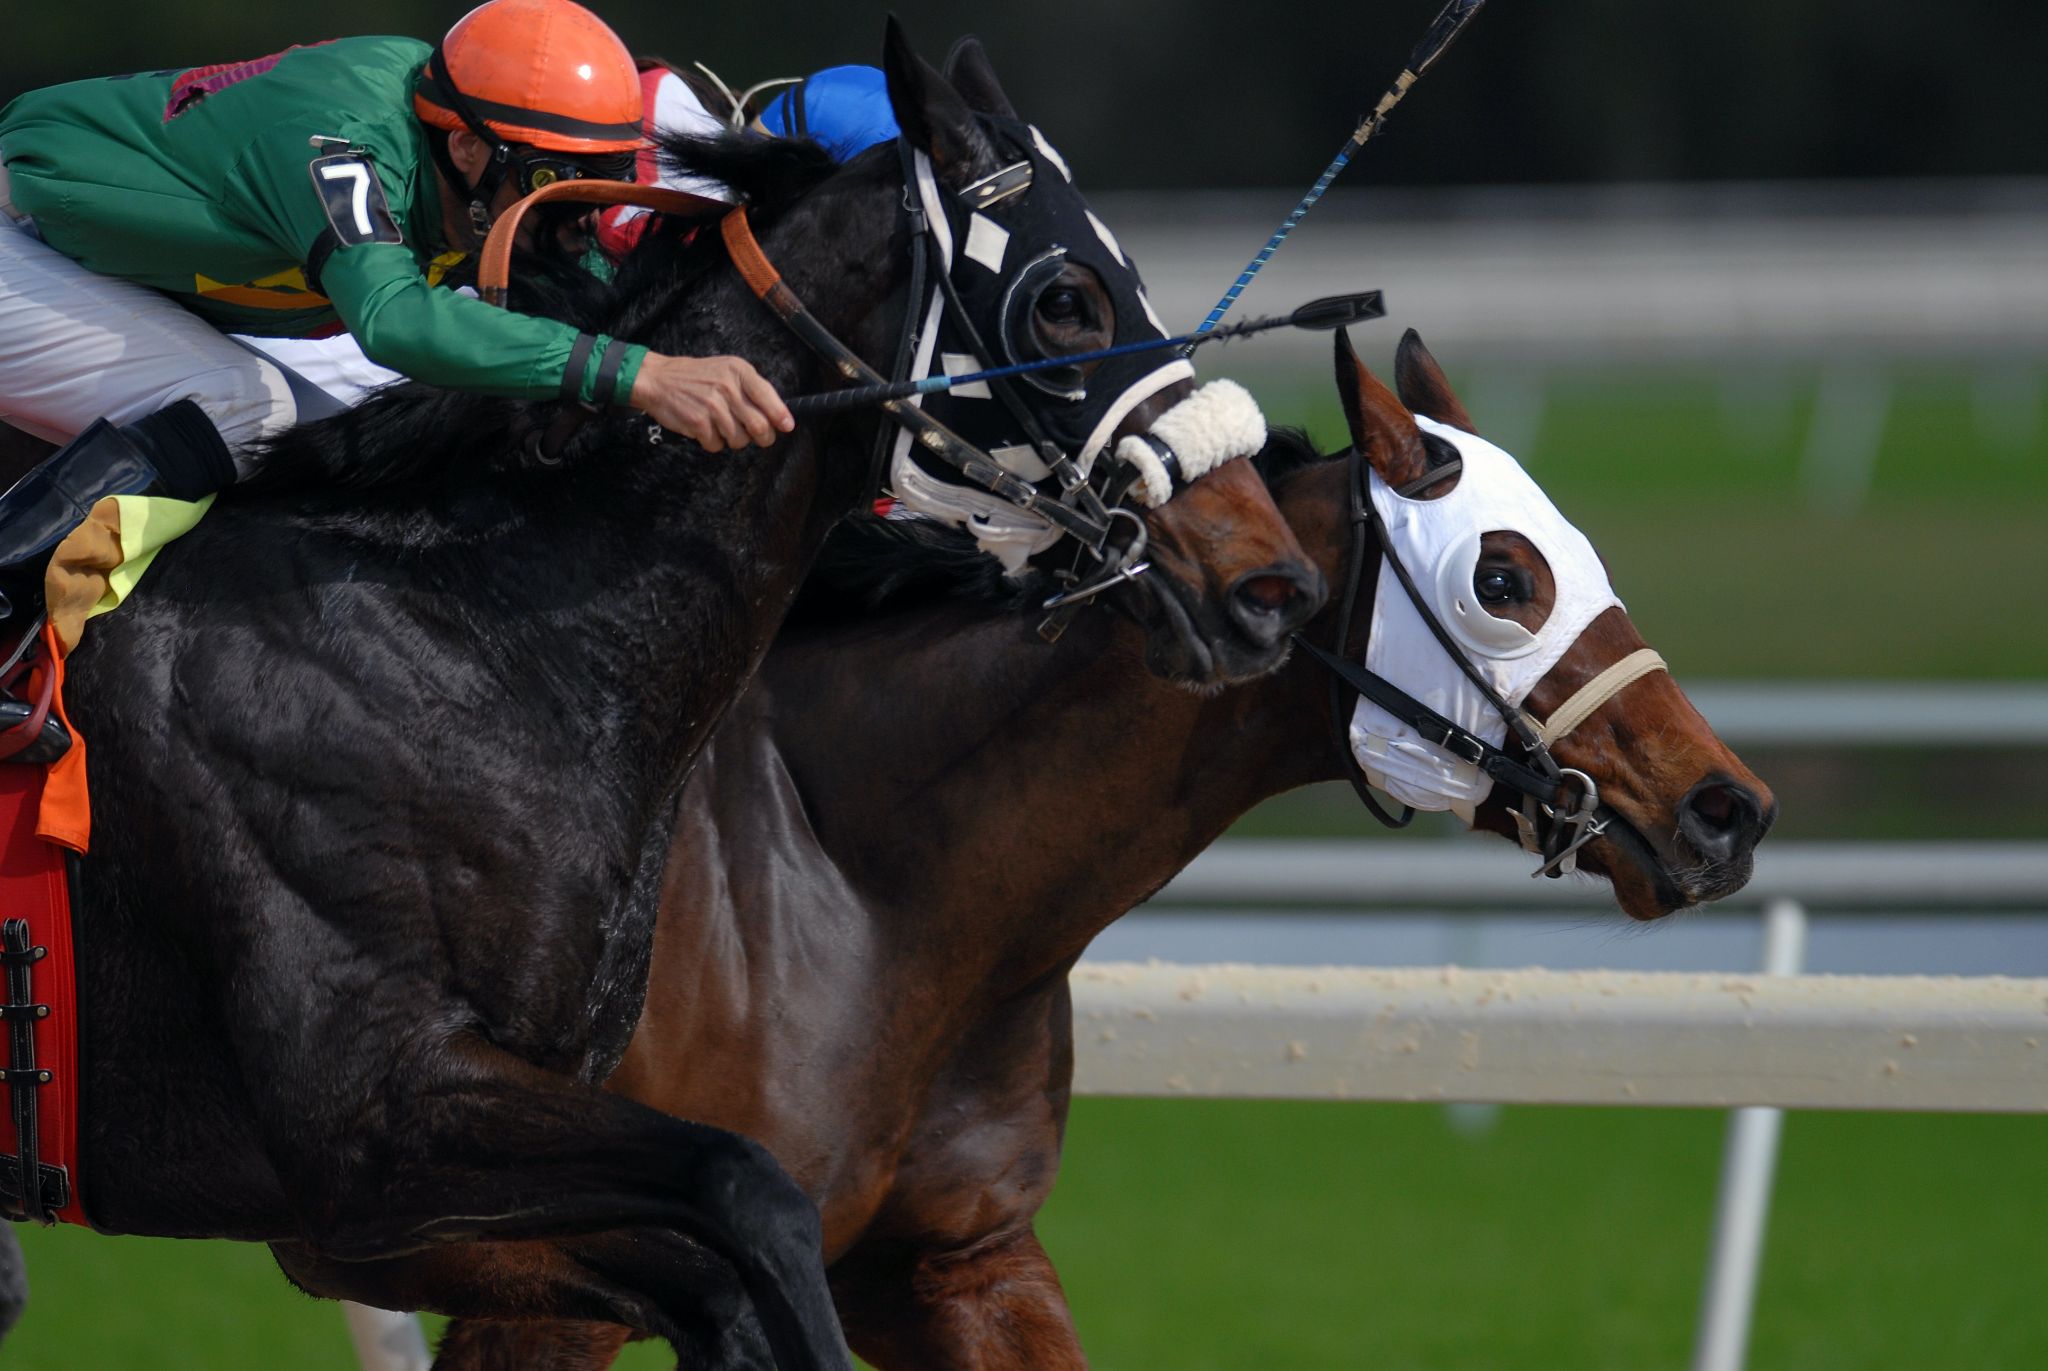 Does America or the UK have better horse racing events?